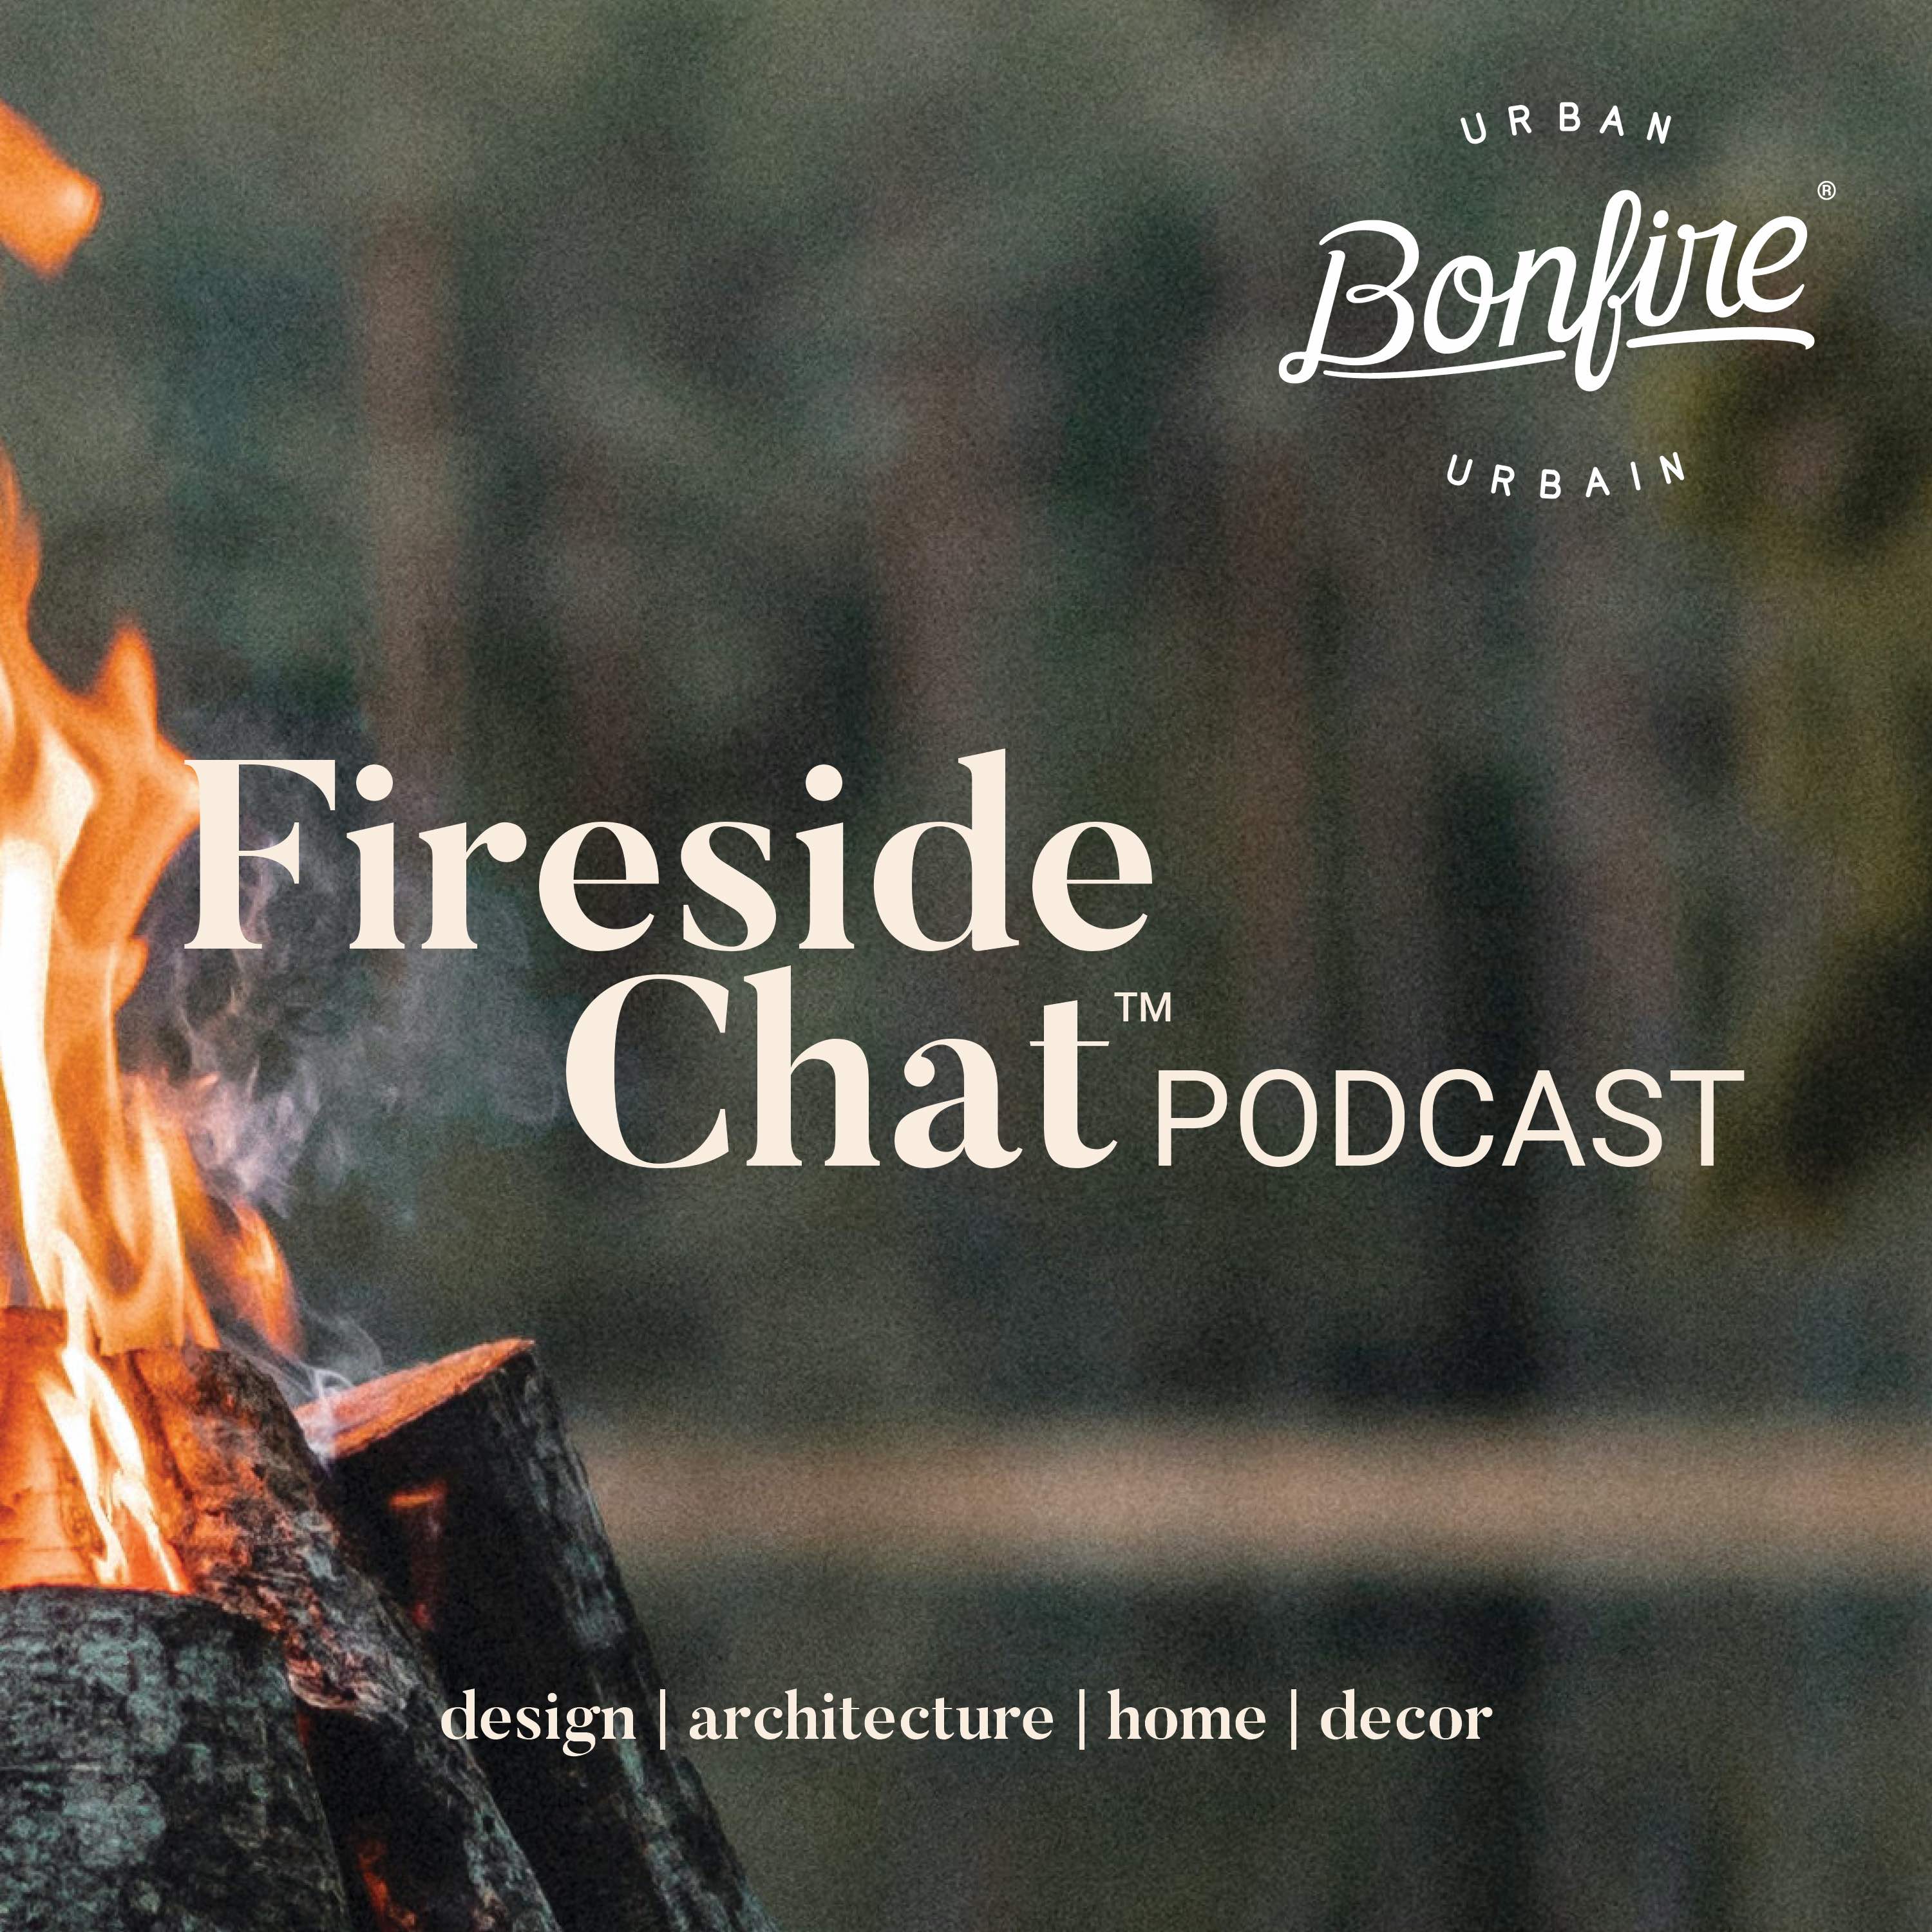 Fireside Chat Podcast